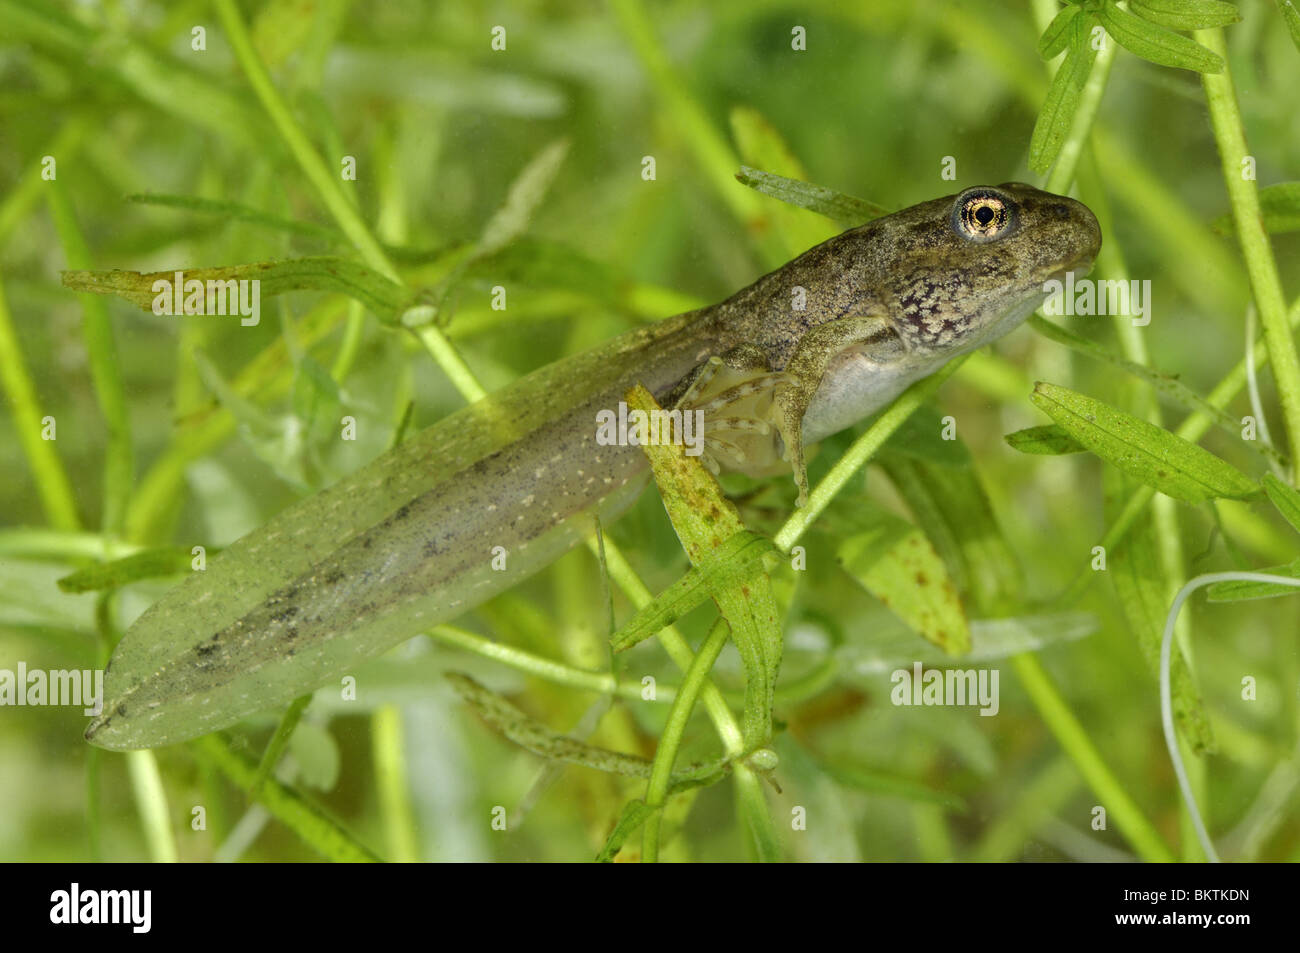 Tadpole with 4 legs & tail swimming in a puddle Stock Photo